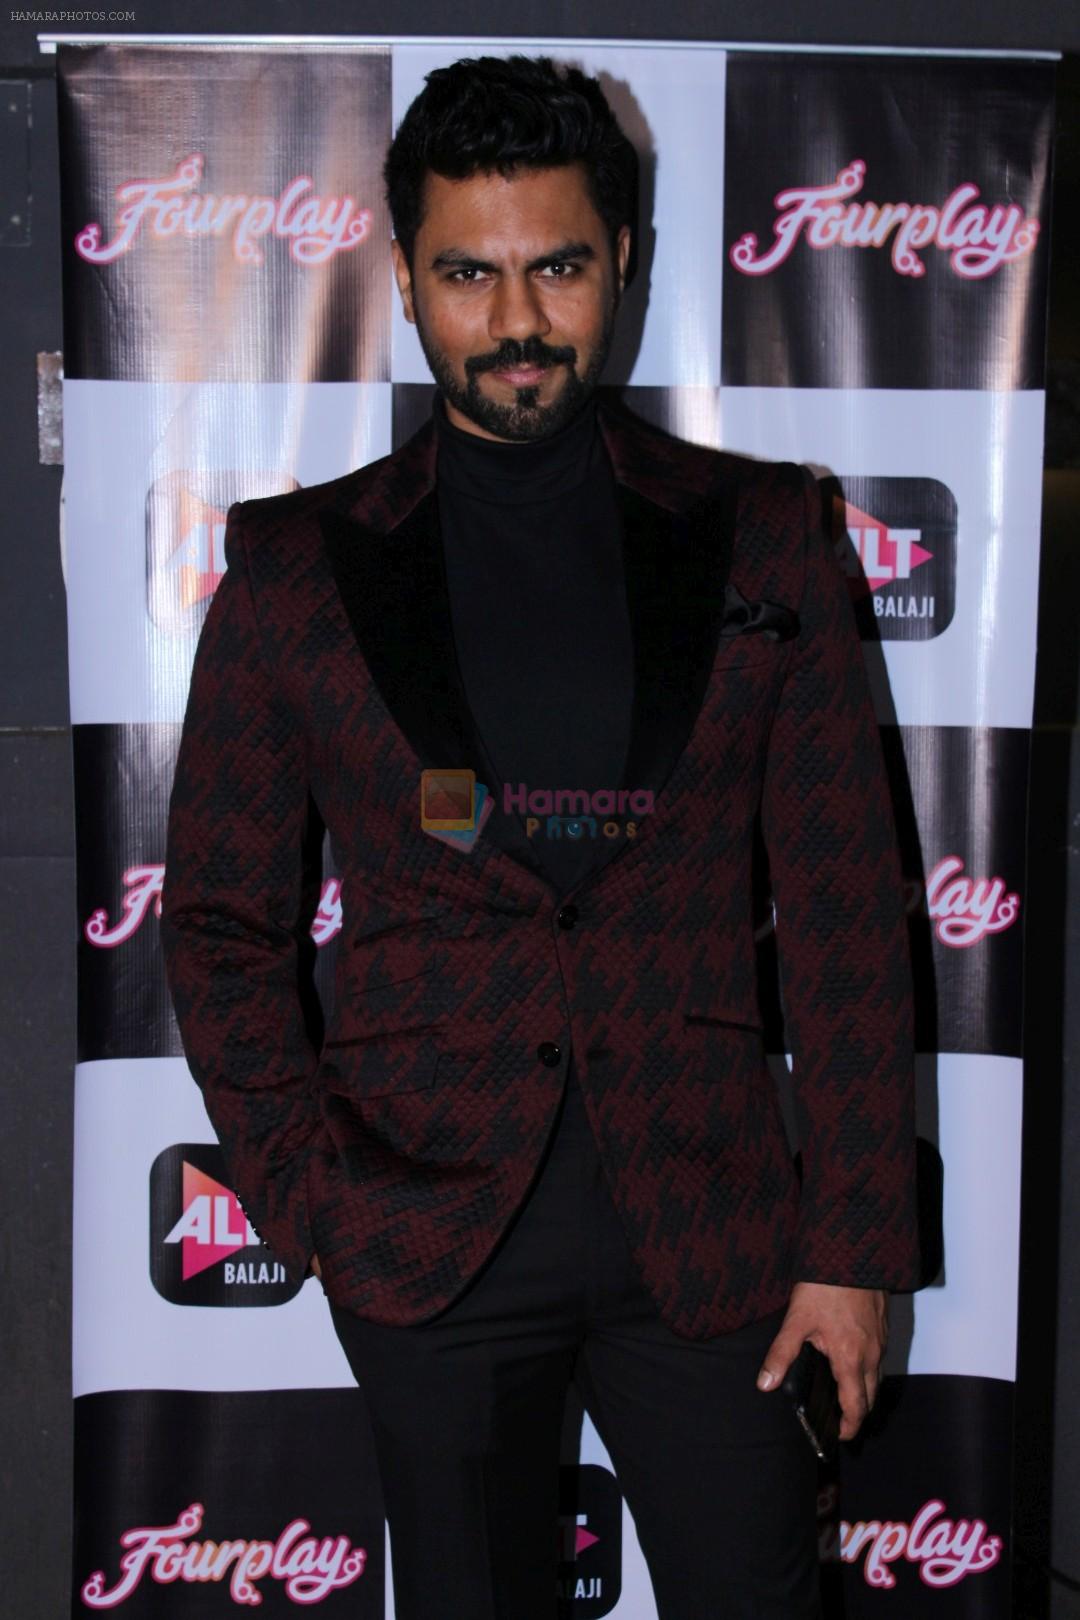 Gaurav Chopra at the Celebration Of Pre Launch Of The Altbalaji's Next Web Show Four Play on 11th Dec 2017